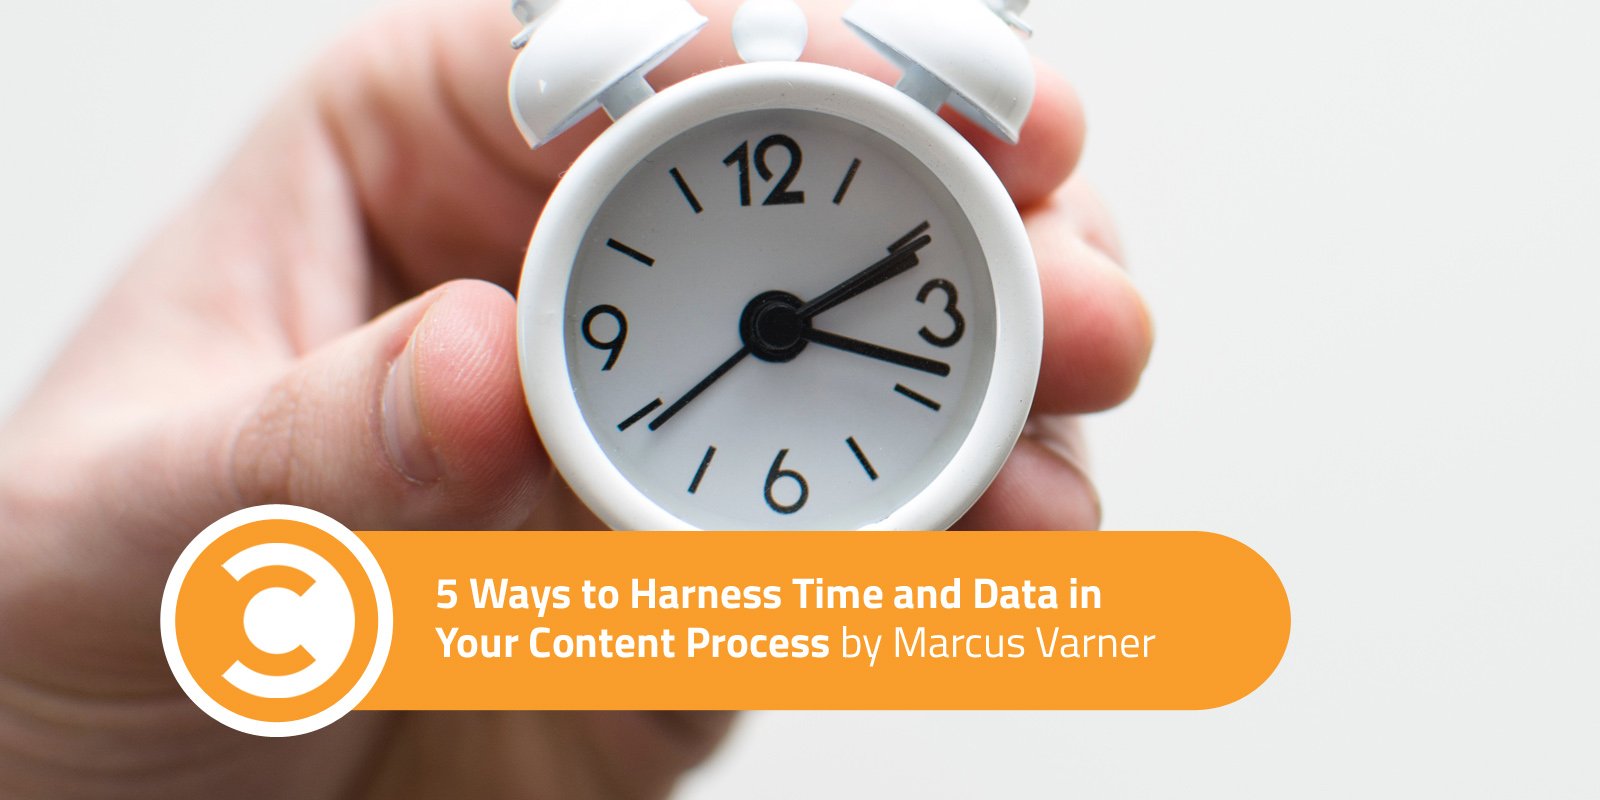 5 Ways to Harness Time and Data in Your Content Process